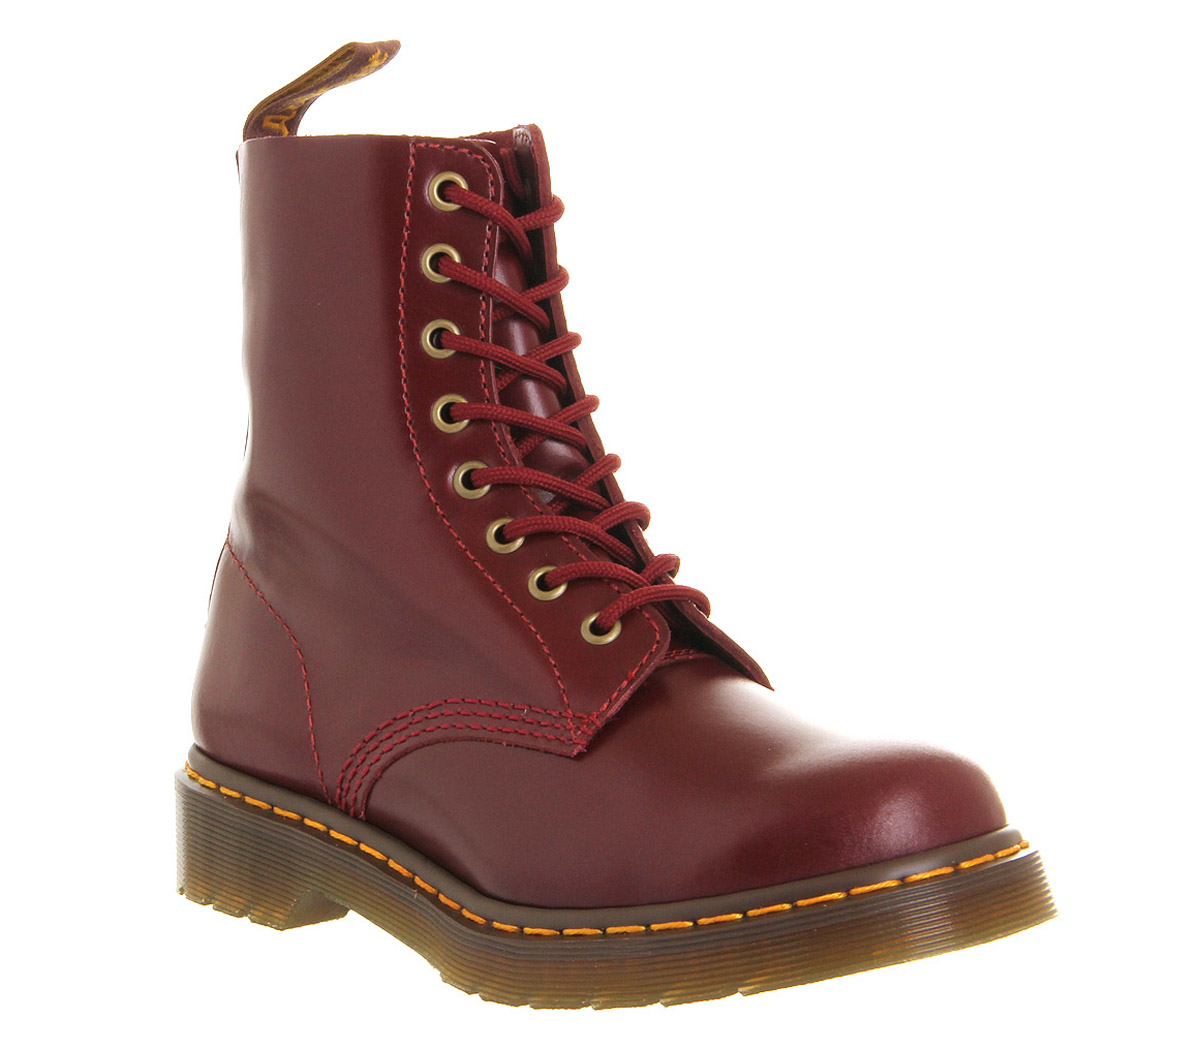 Dr. Martens 8 Eyelet Lace Up boots Shiraz Leather - Women's Ankle Boots